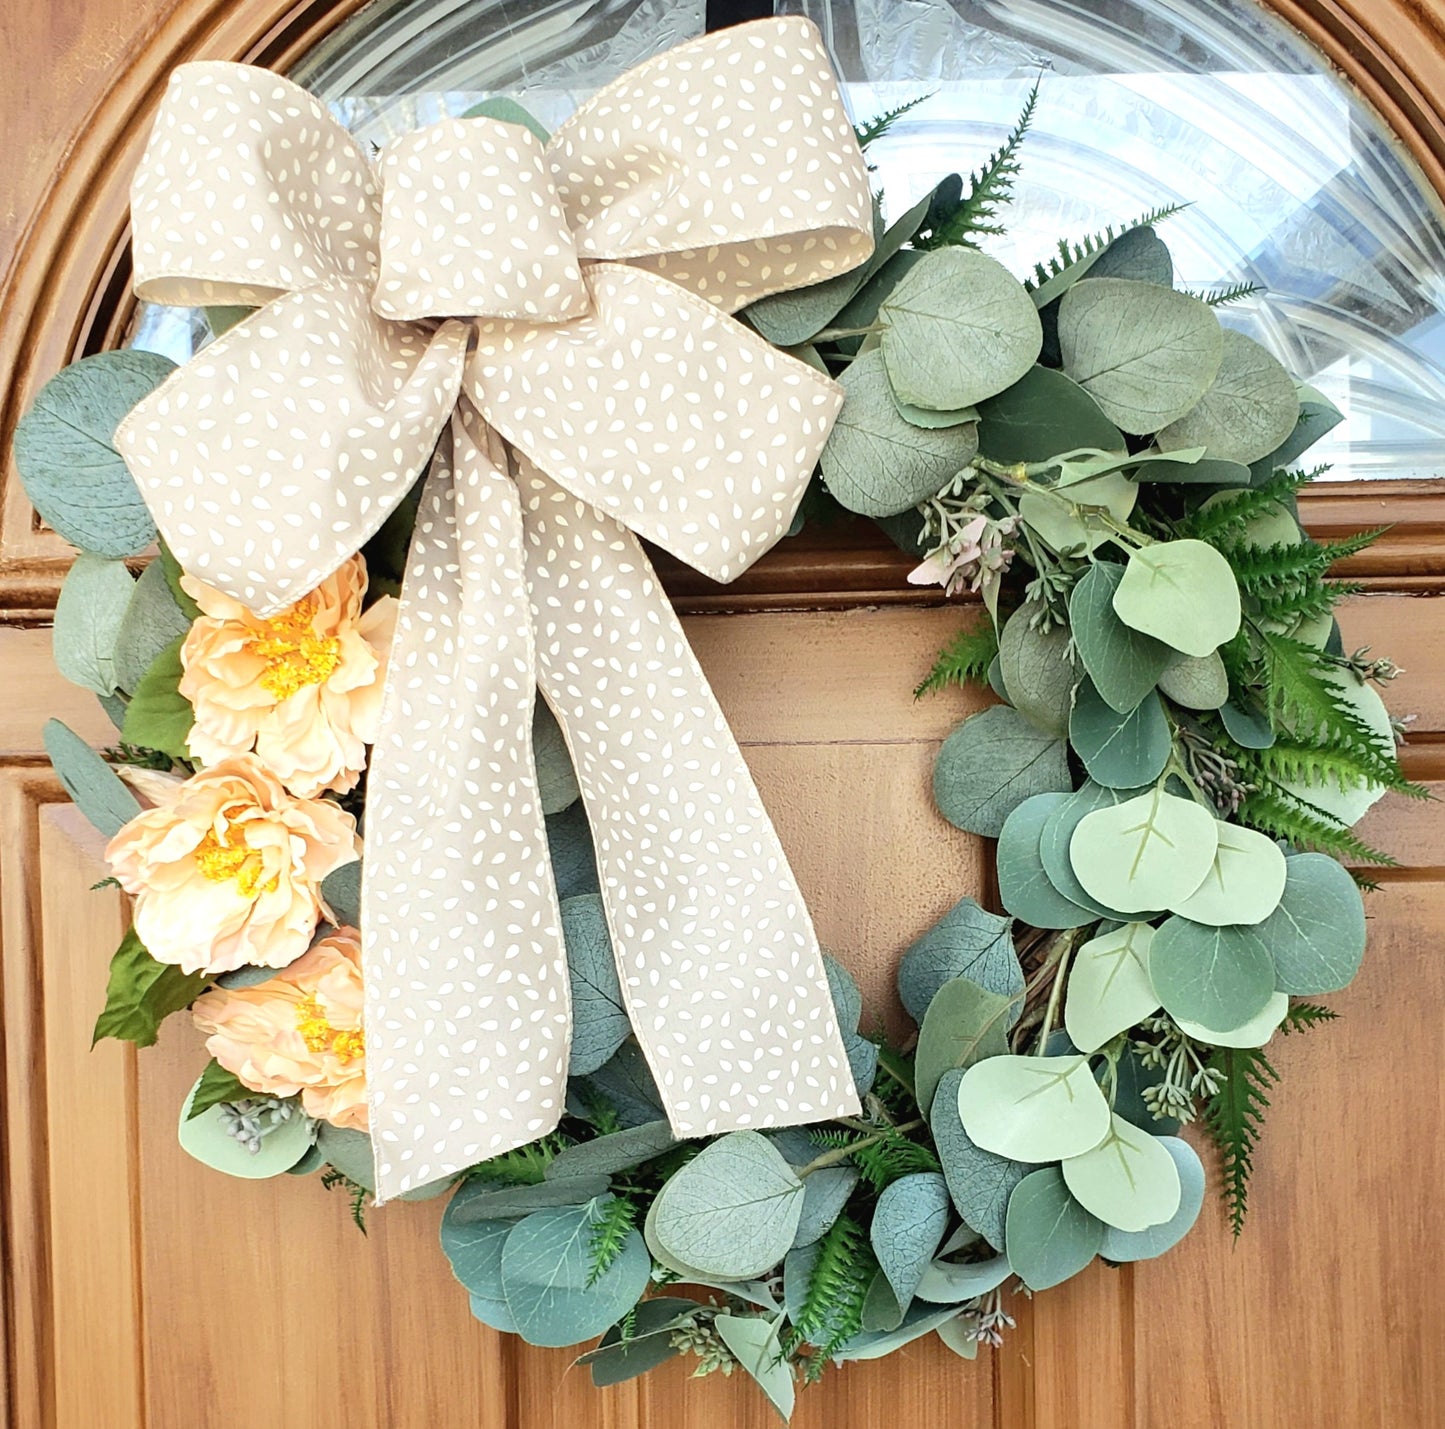 Farmhouse style Eucalyptus Wreath with Carnation Accents for gift or self, front view.